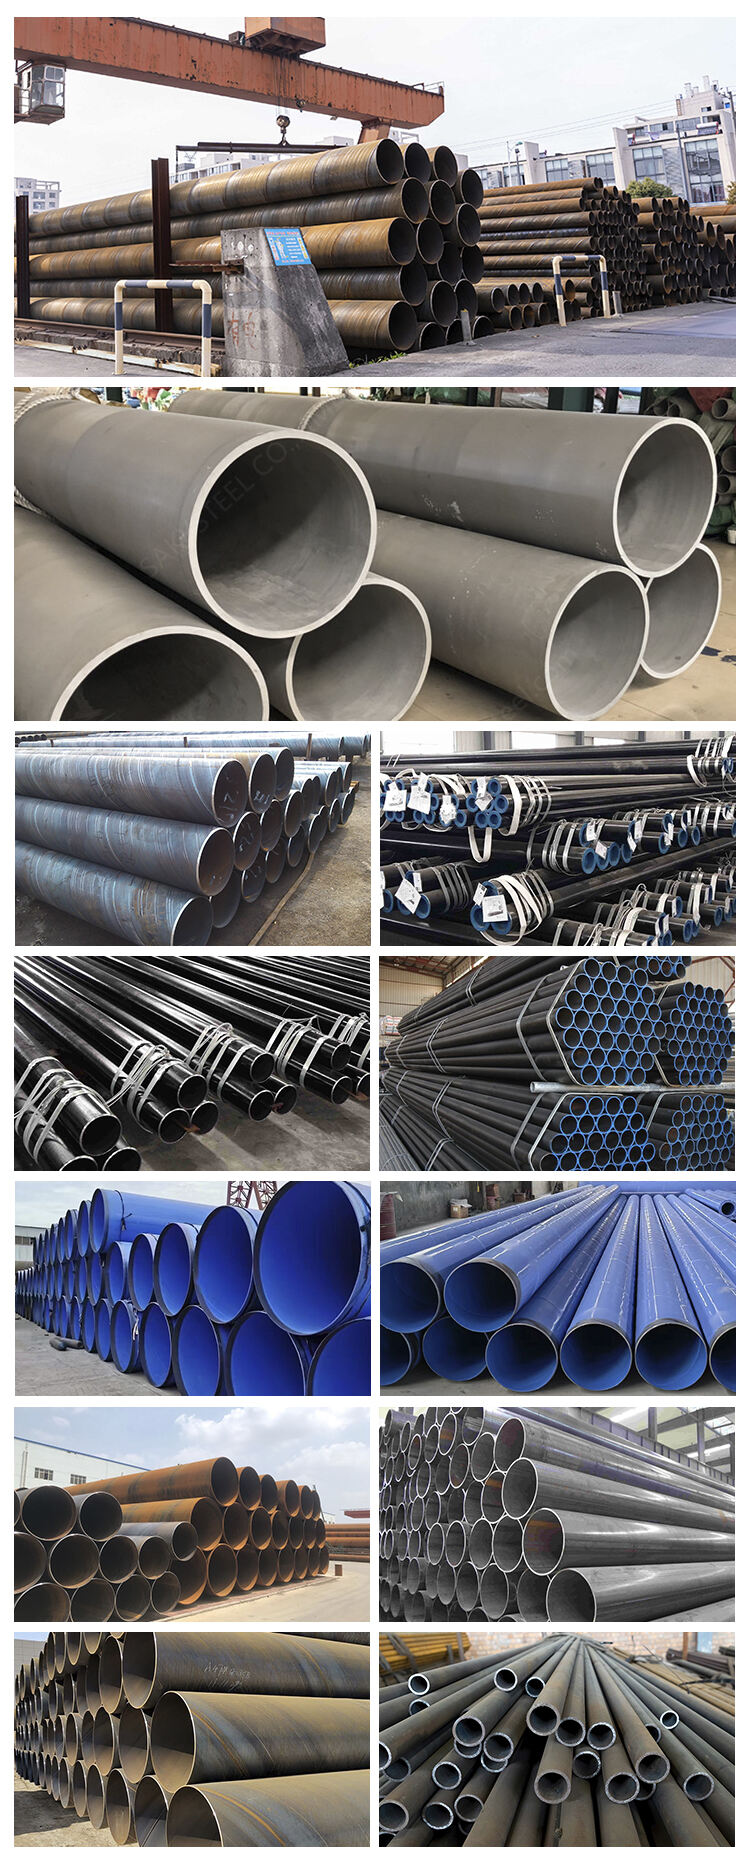 High quality seamless 16 inch carbon steel pipe sch40 q235b q345b low carbon steel pipe details